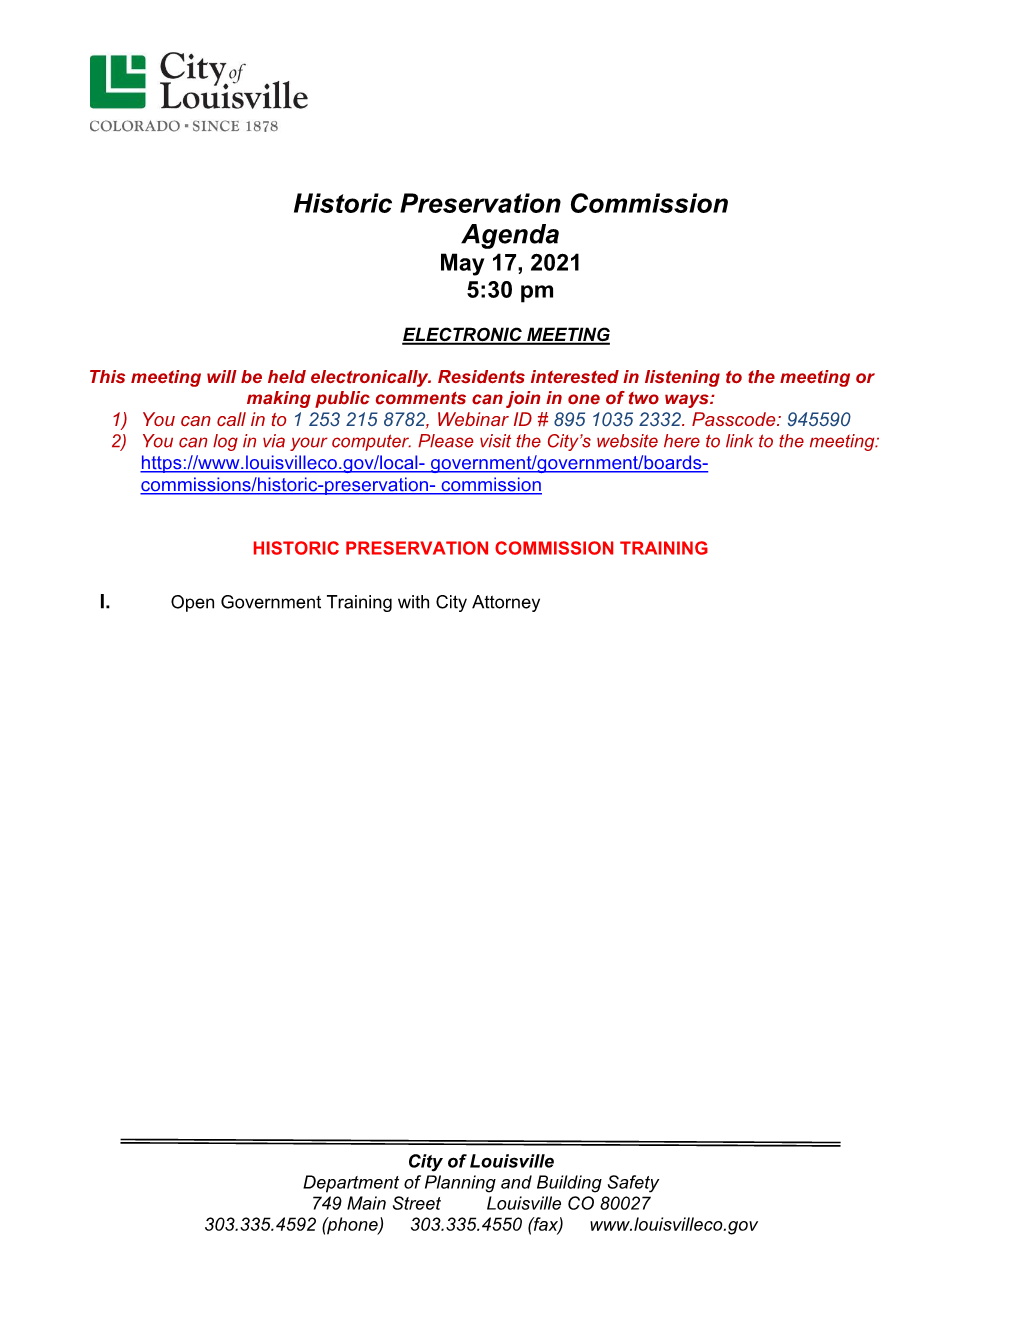 Historic Preservation Commission Agenda May 17, 2021 5:30 Pm